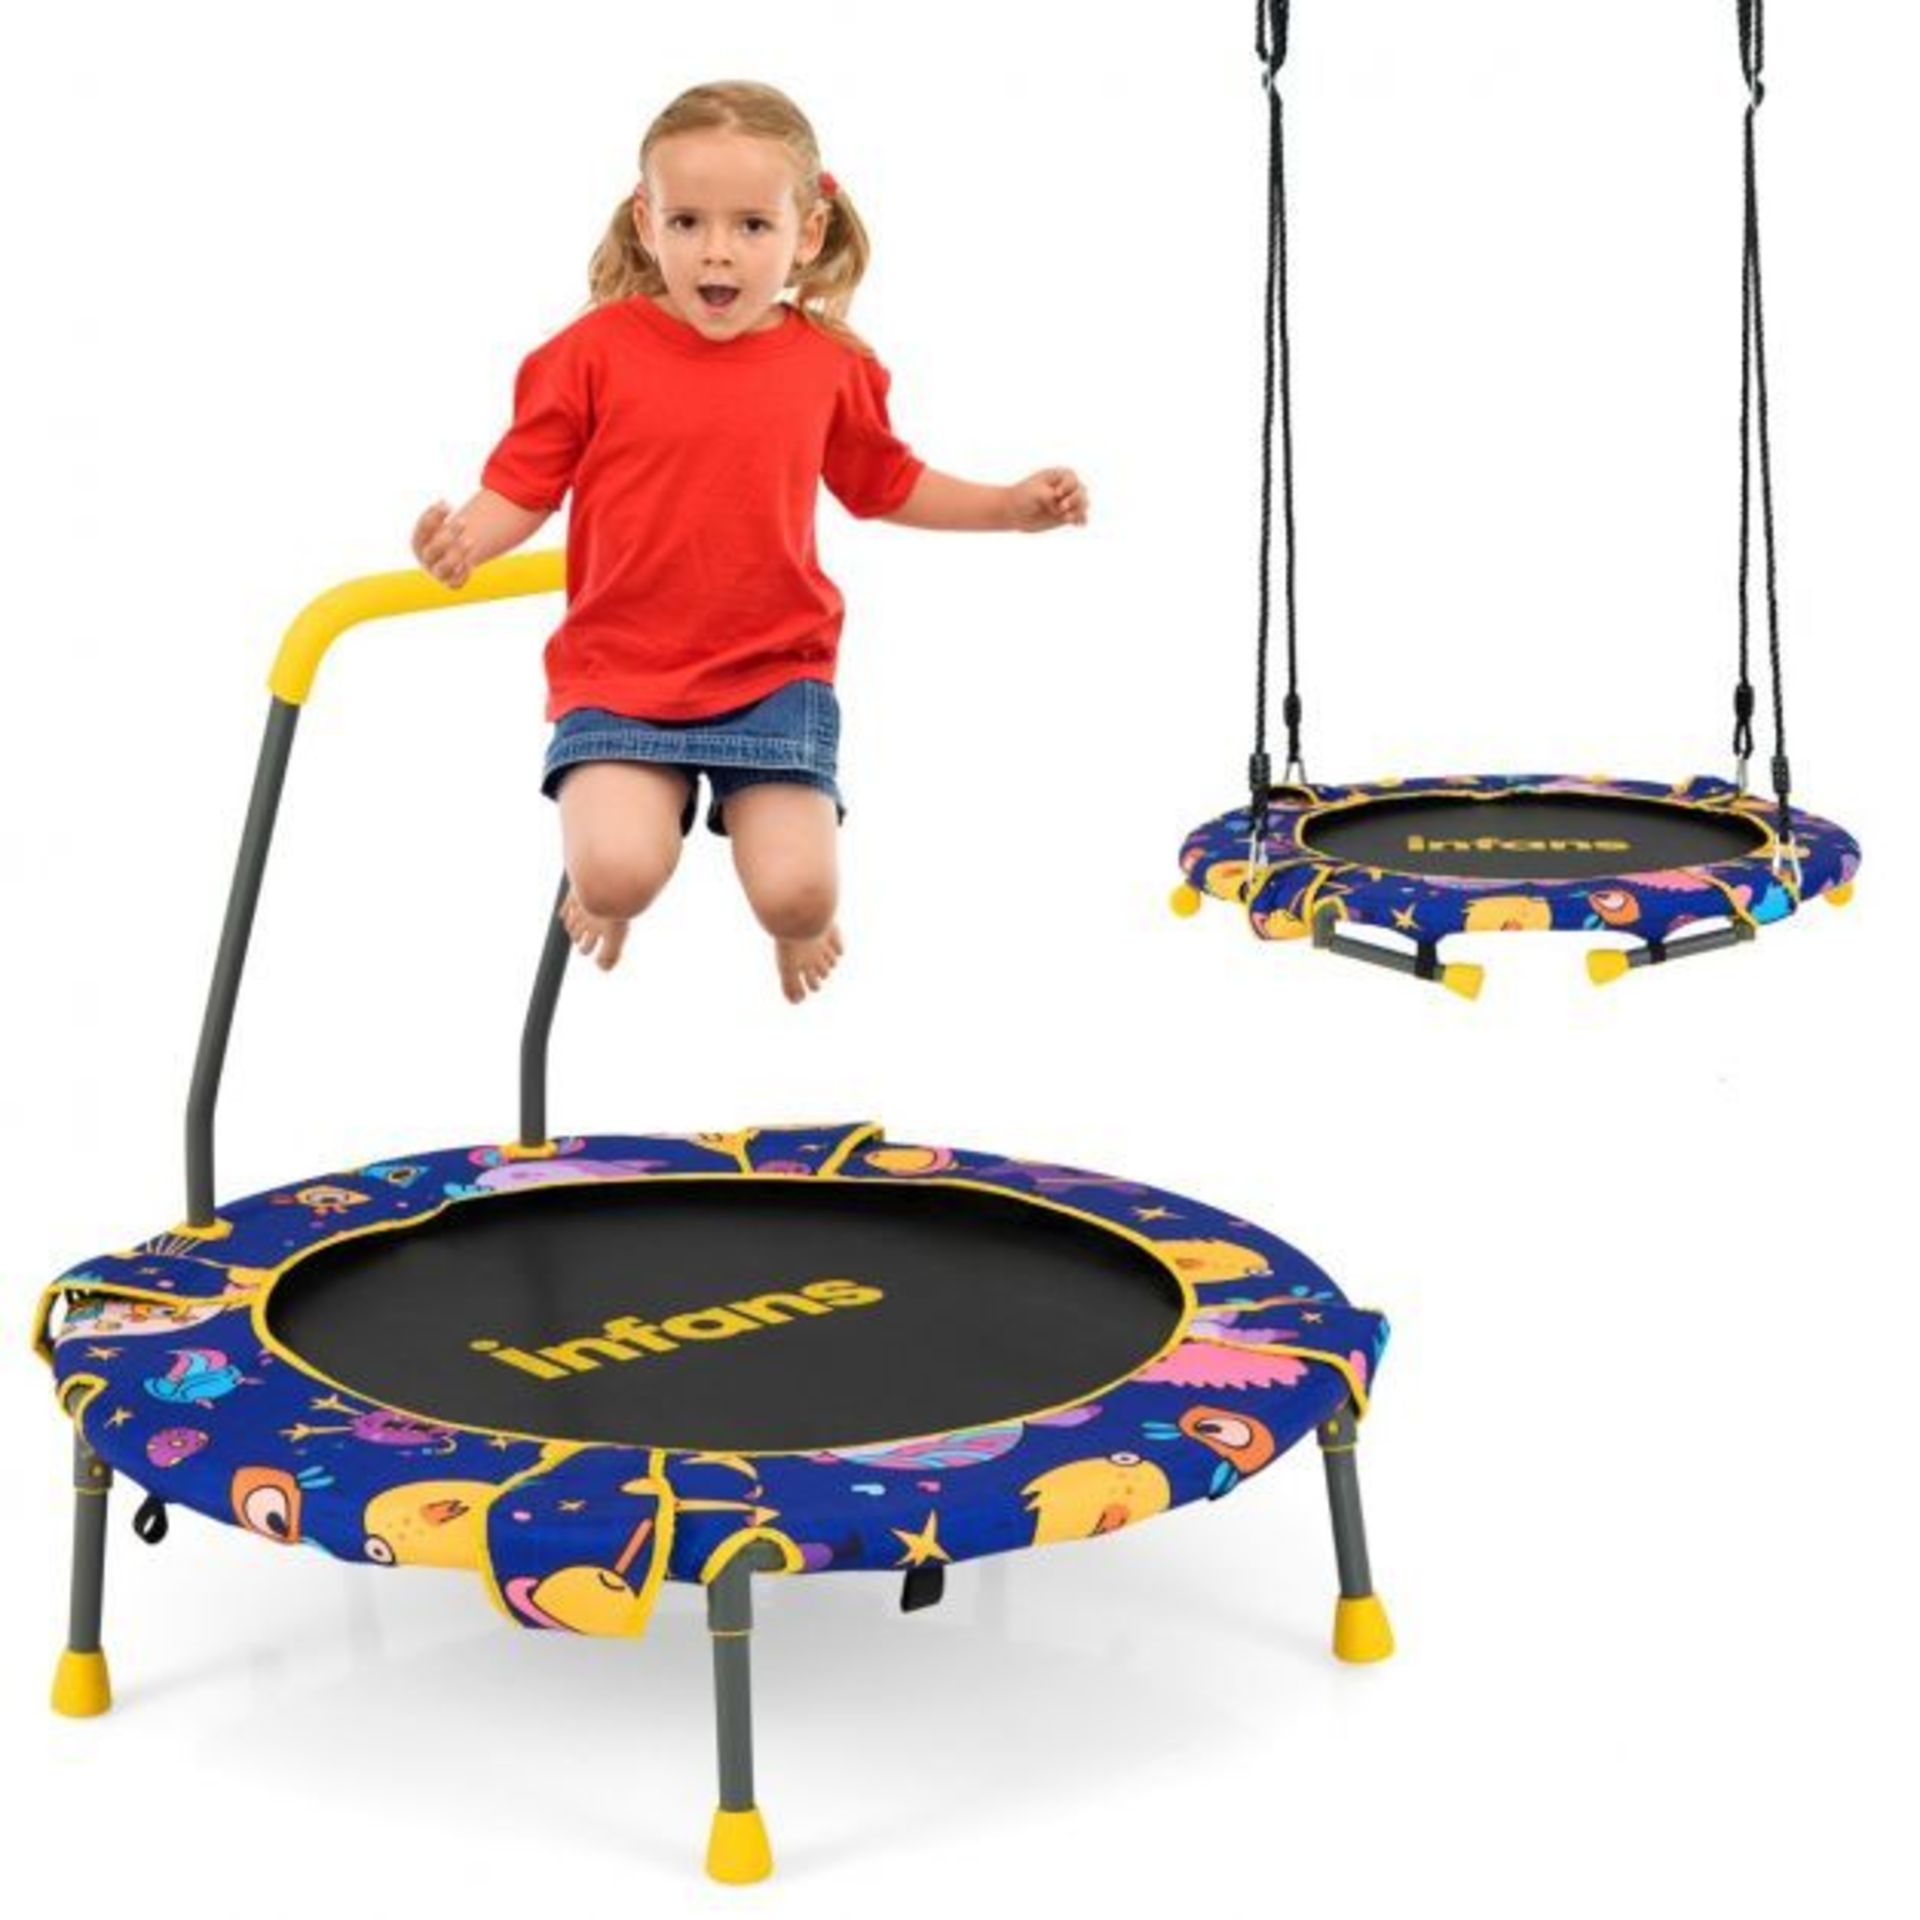 2-in-1 Folding Toddler Trampoline and Swing with Removable Handle. - ER53. This kids toy is a